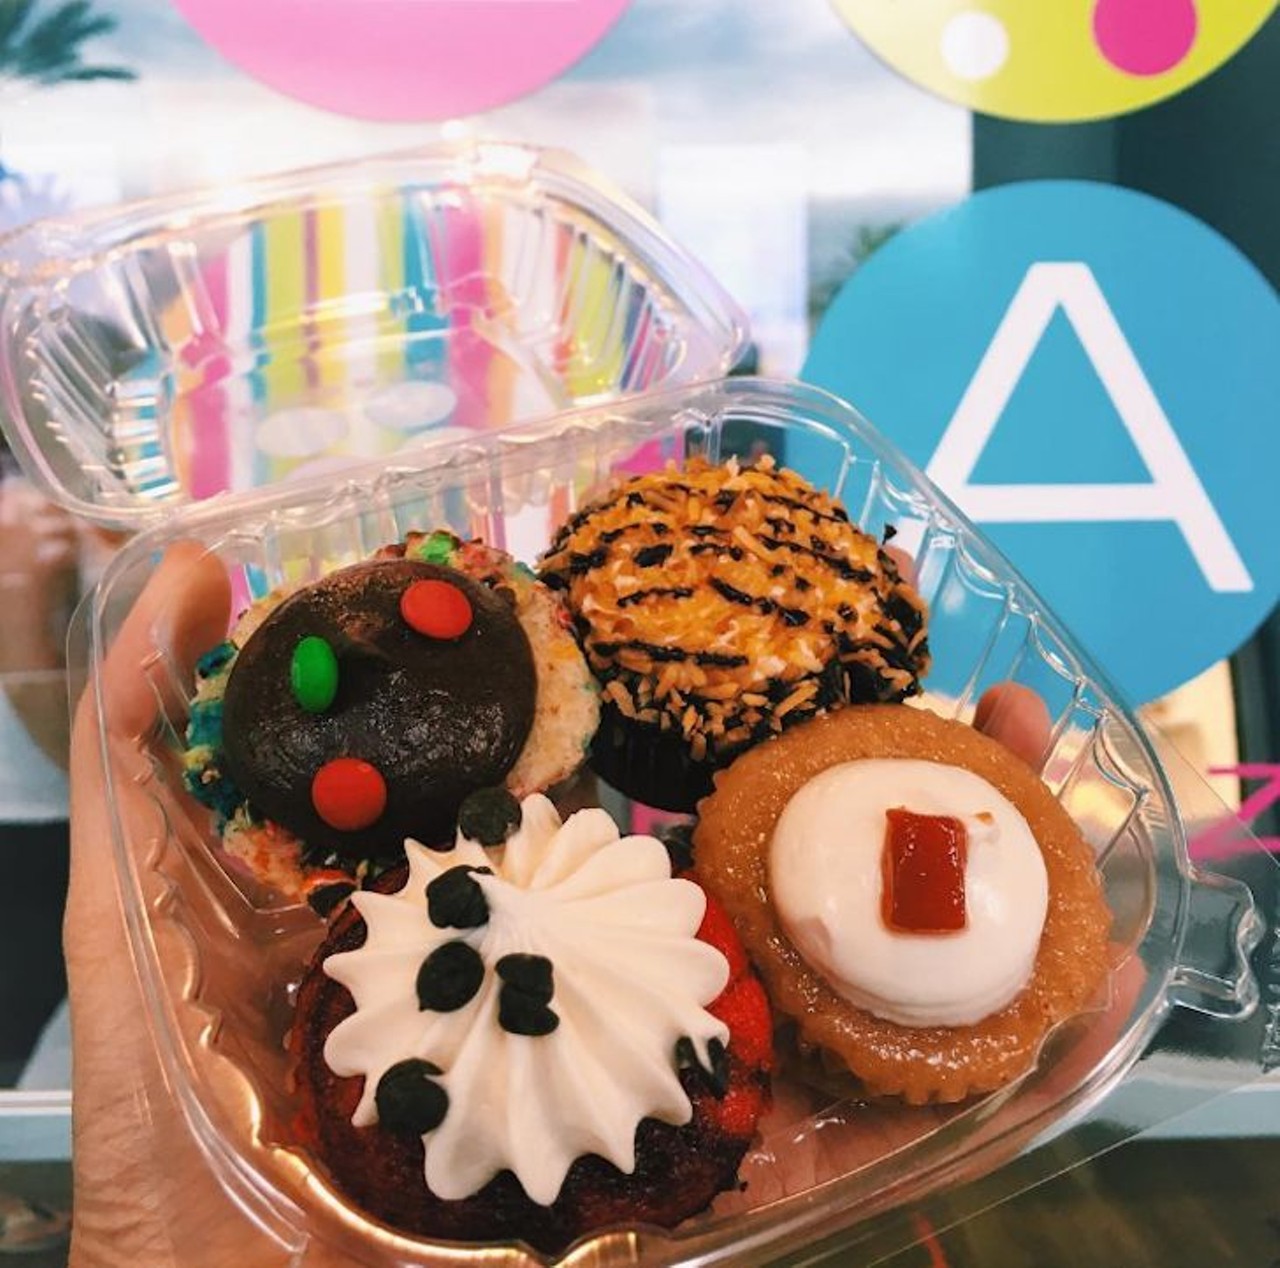 La Sweetz Orlando
7535 W. Sand Lake Road, (407) 757-2000
This bakery got its start in Miami and now it&#146;s bringing its big, bold flavors to Orlando with flavors like guava and tropical coconut red velvet. 
Photo via jeannieyen_/Instagram